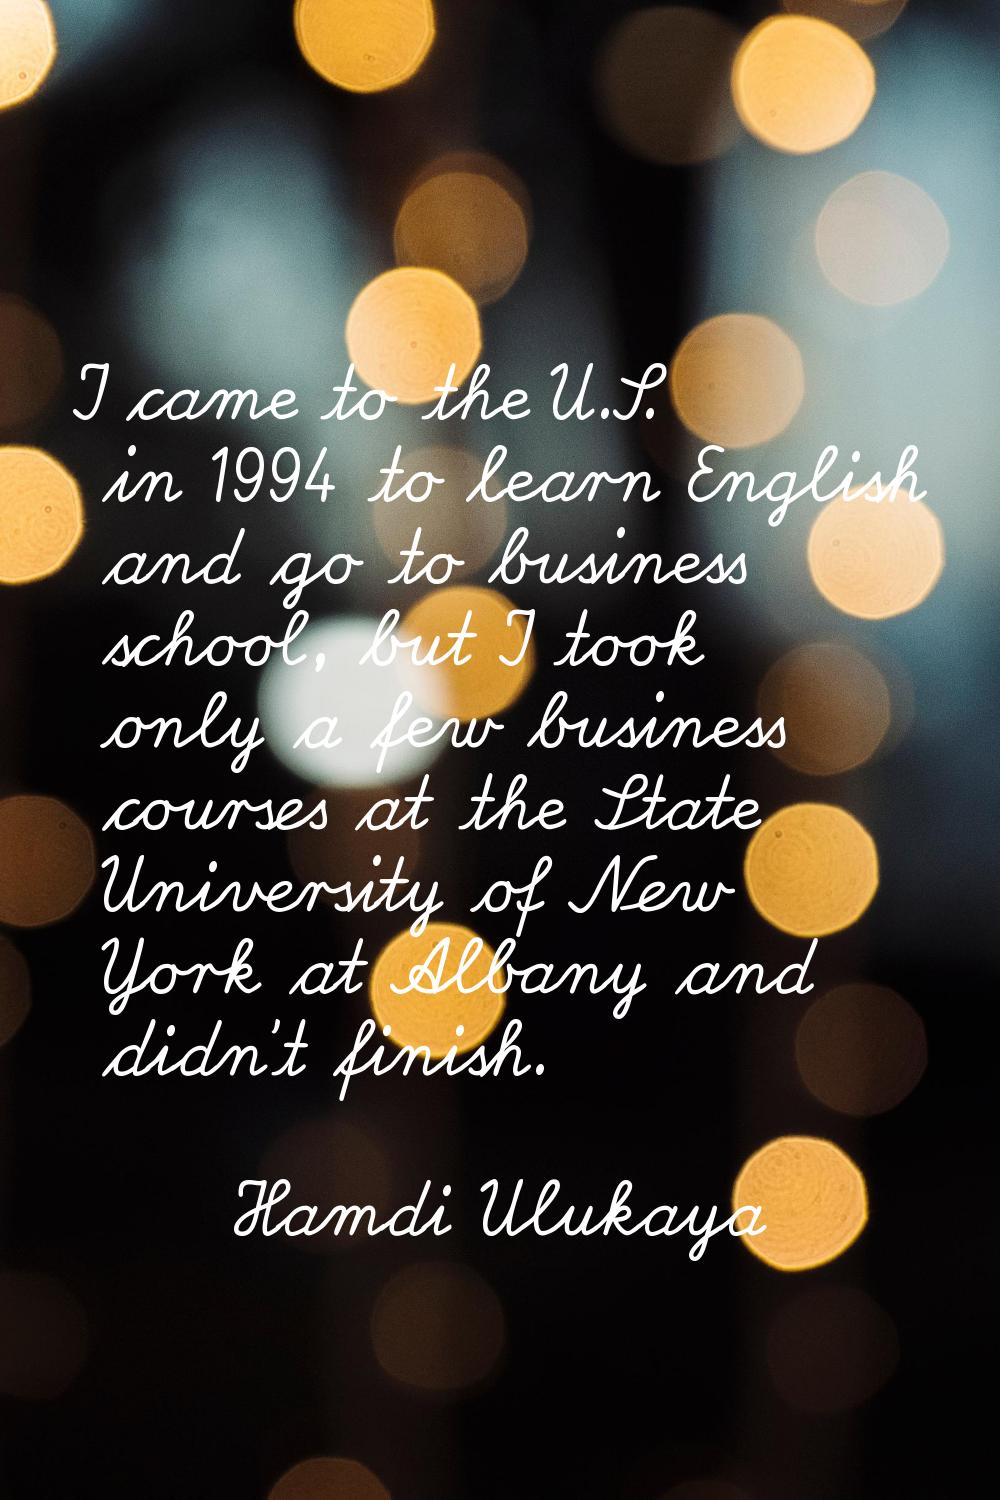 I came to the U.S. in 1994 to learn English and go to business school, but I took only a few busine